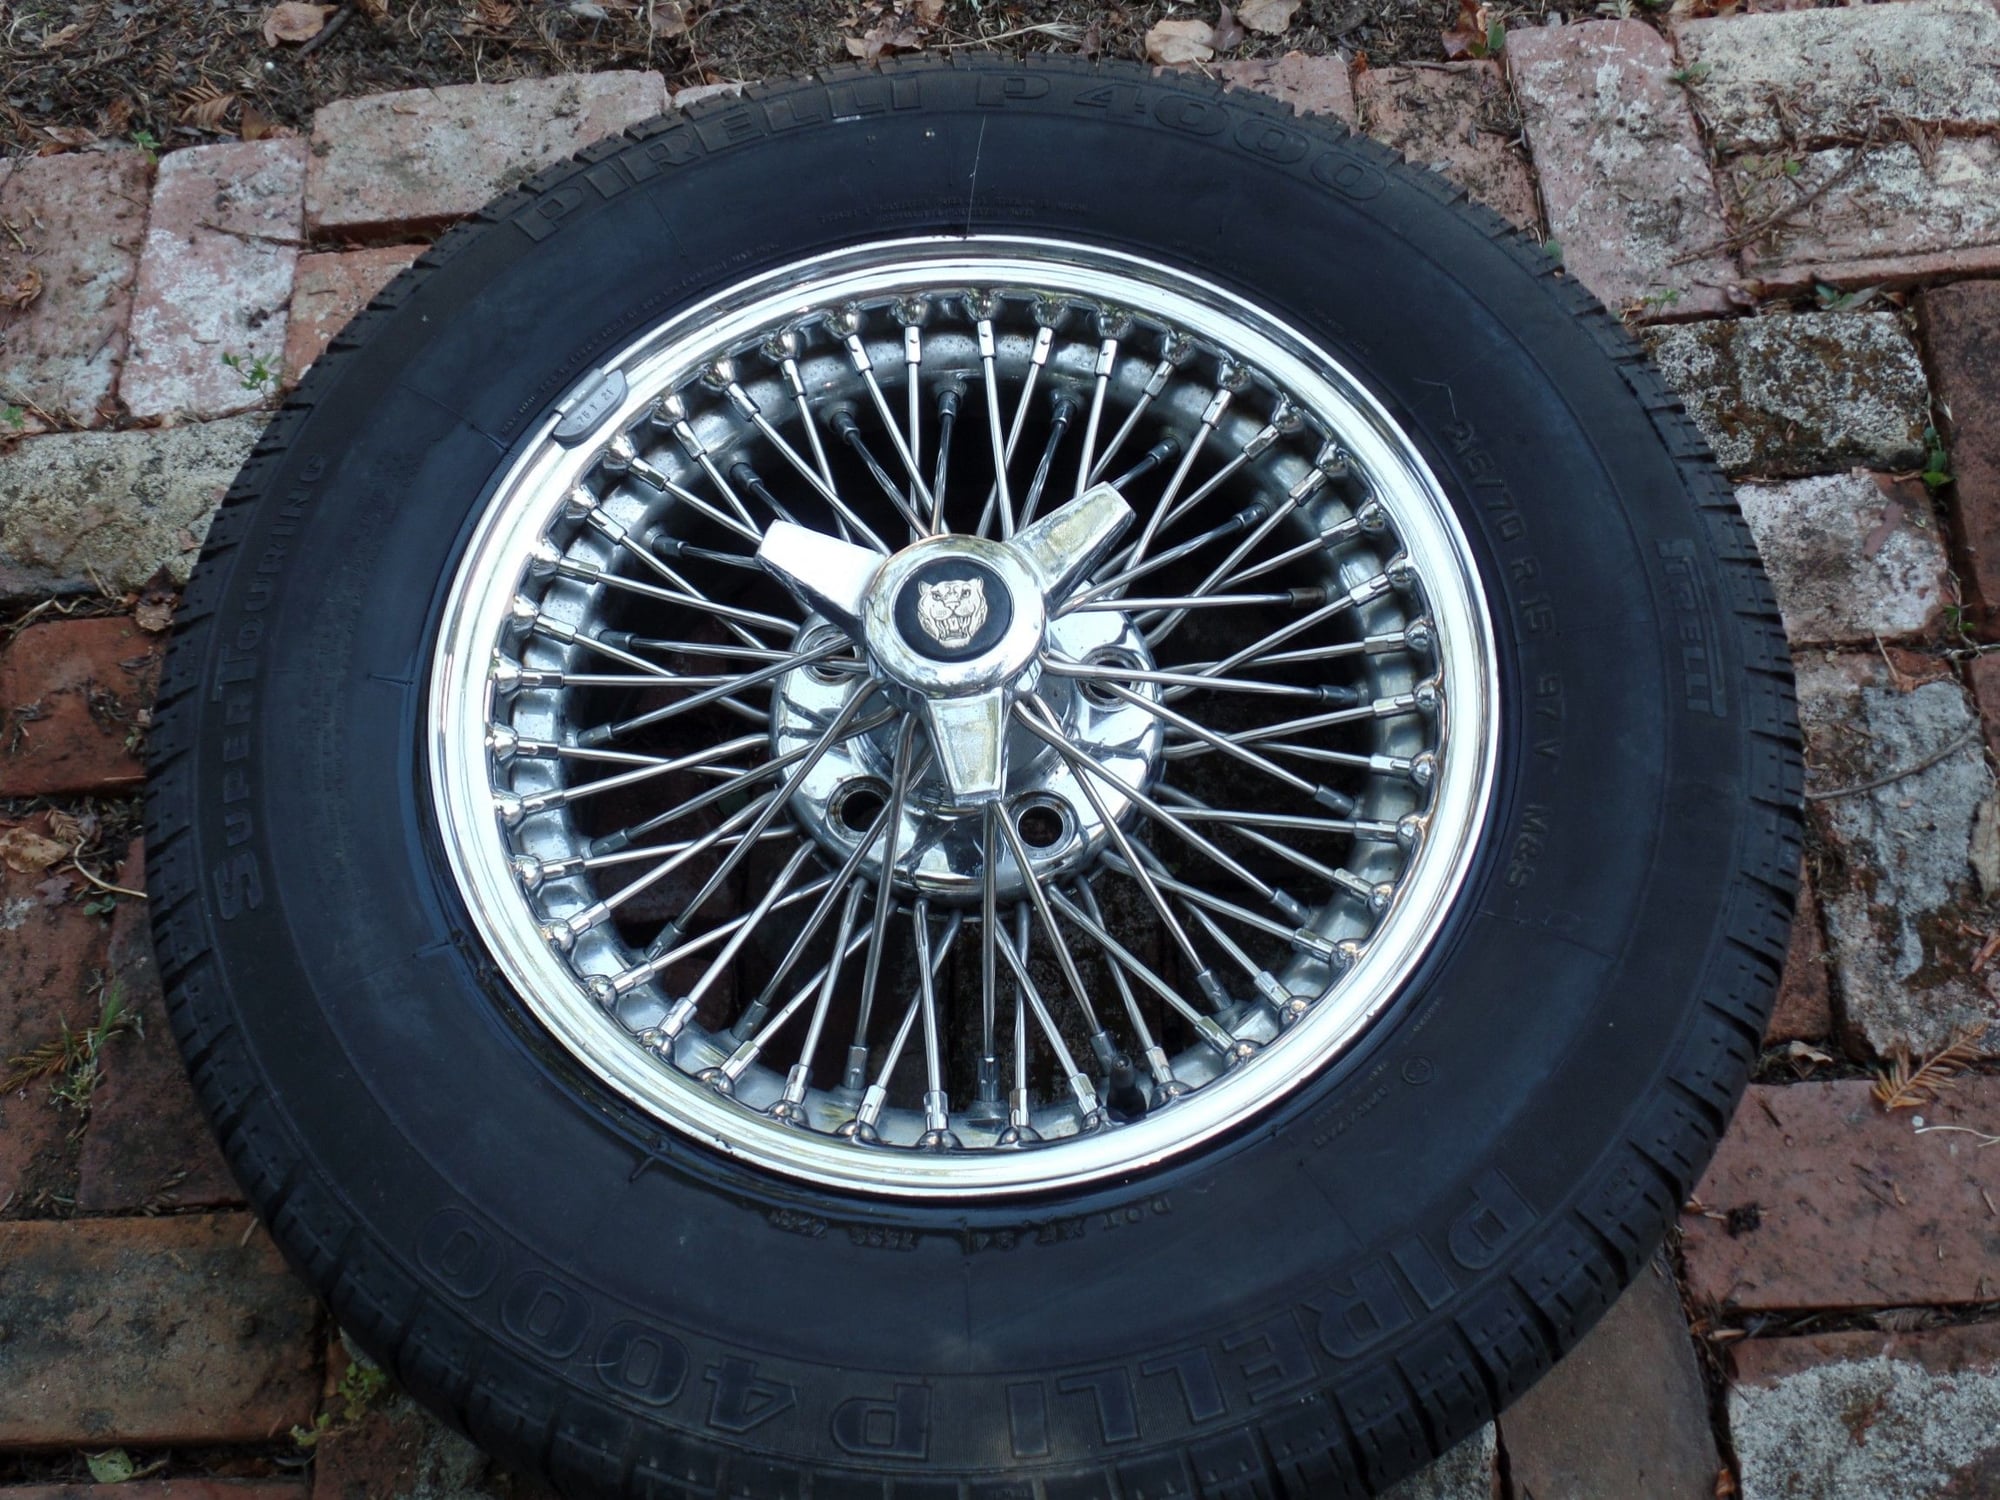 Wheels and Tires/Axles - Dayton wire wheels for XJS set of three - Used - 1975 to 1989 Jaguar XJS - San Jose, CA 95135, United States